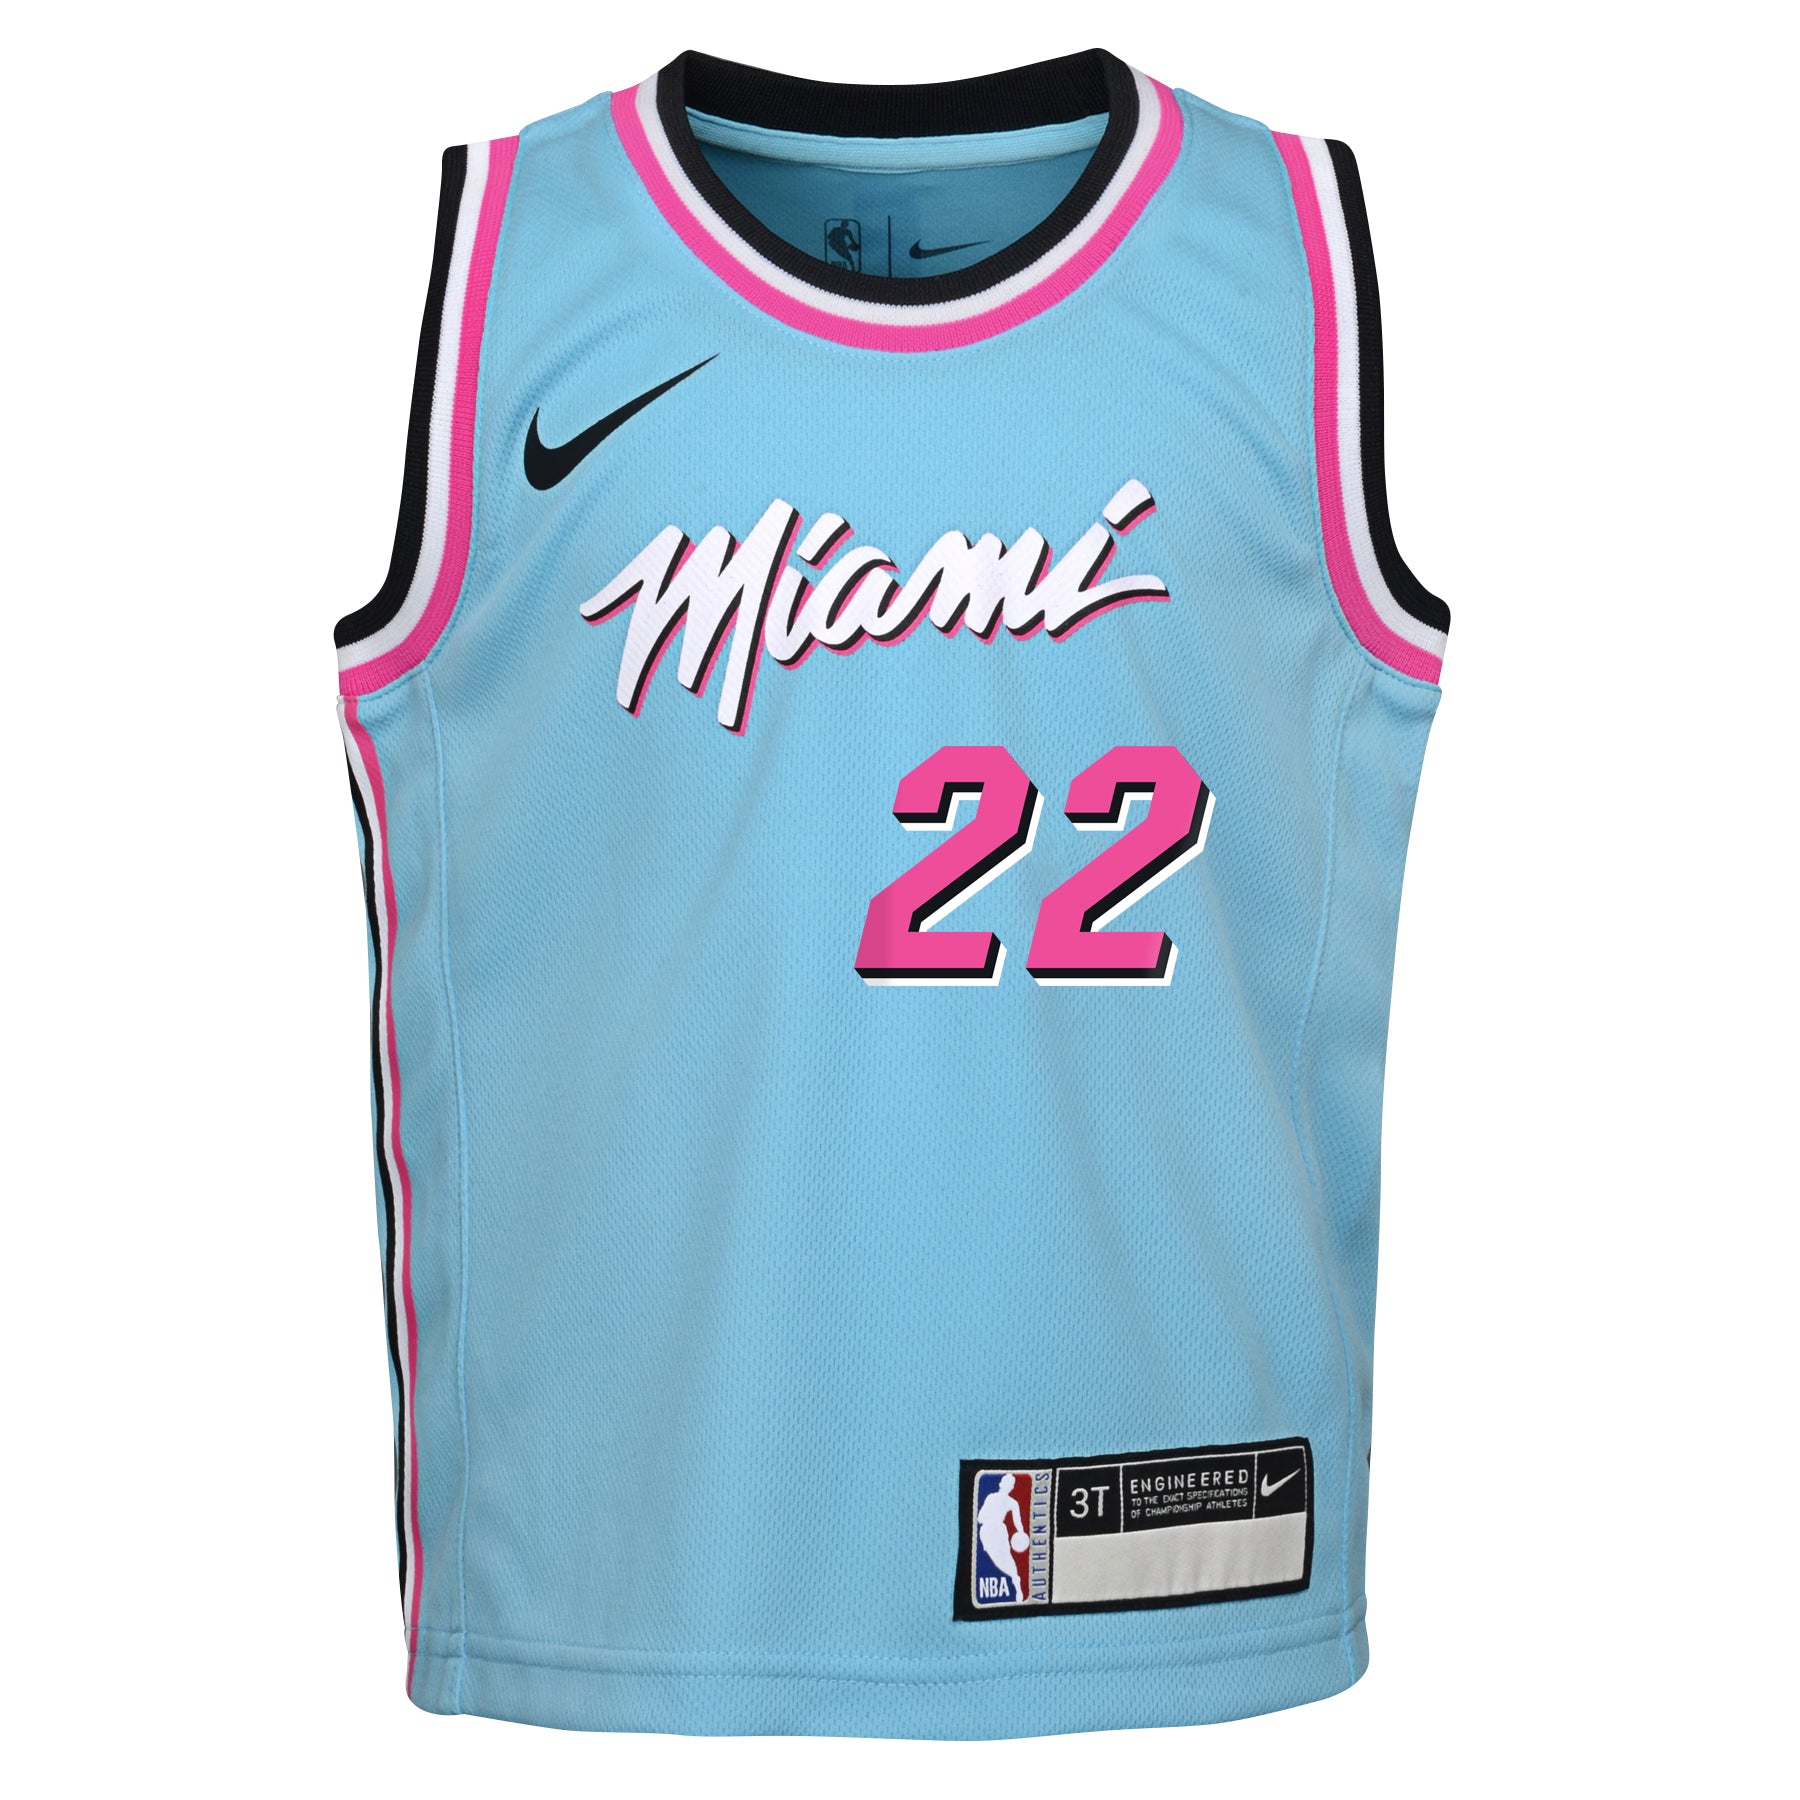 miami vice jimmy butler jersey